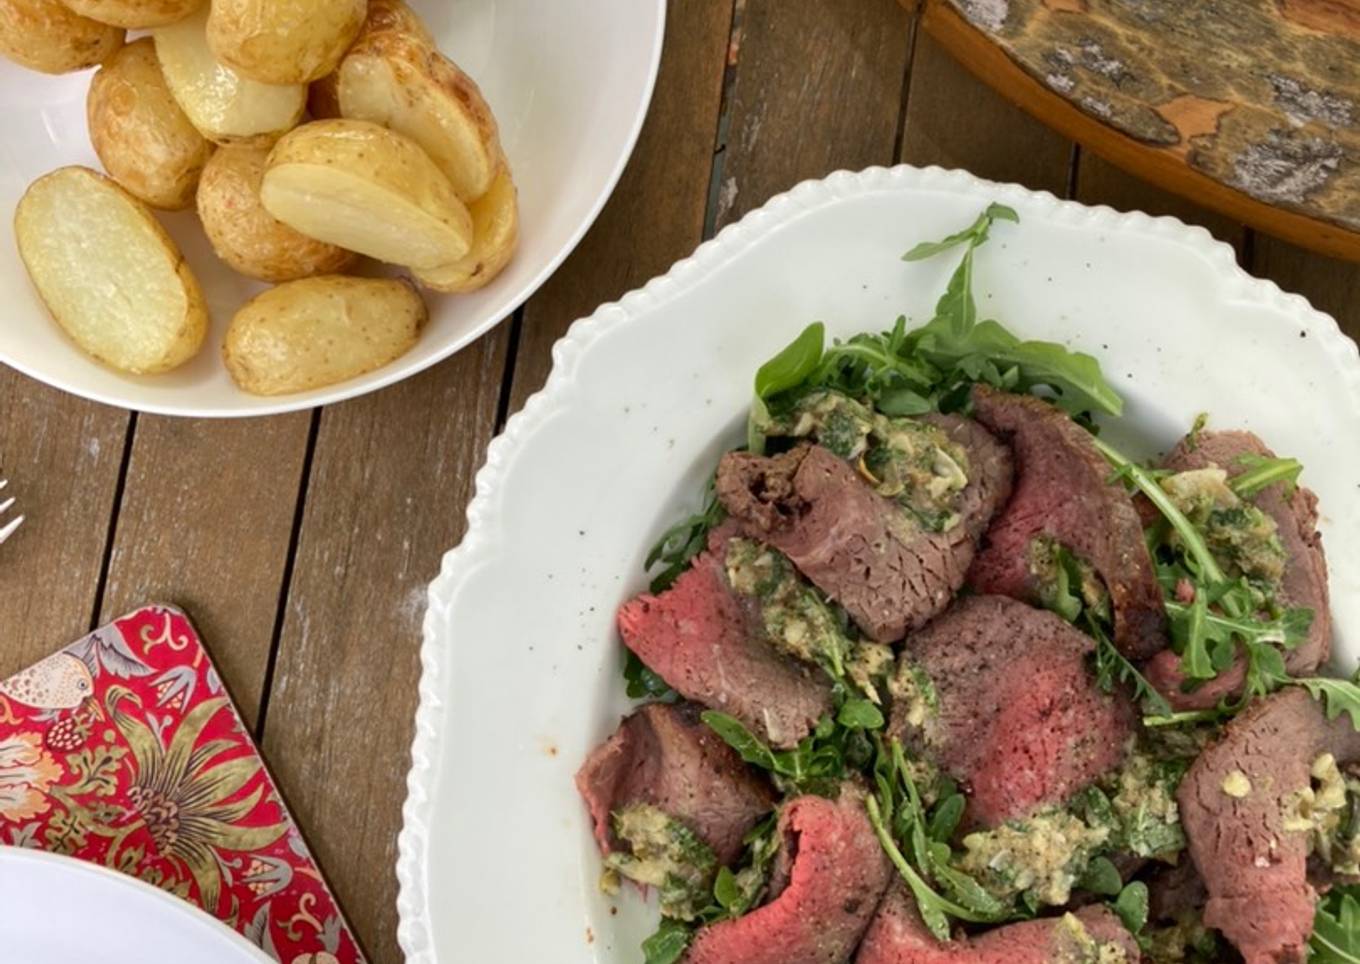 Mustard crusted silverside roast beef and rocket salad #CookEveryPart